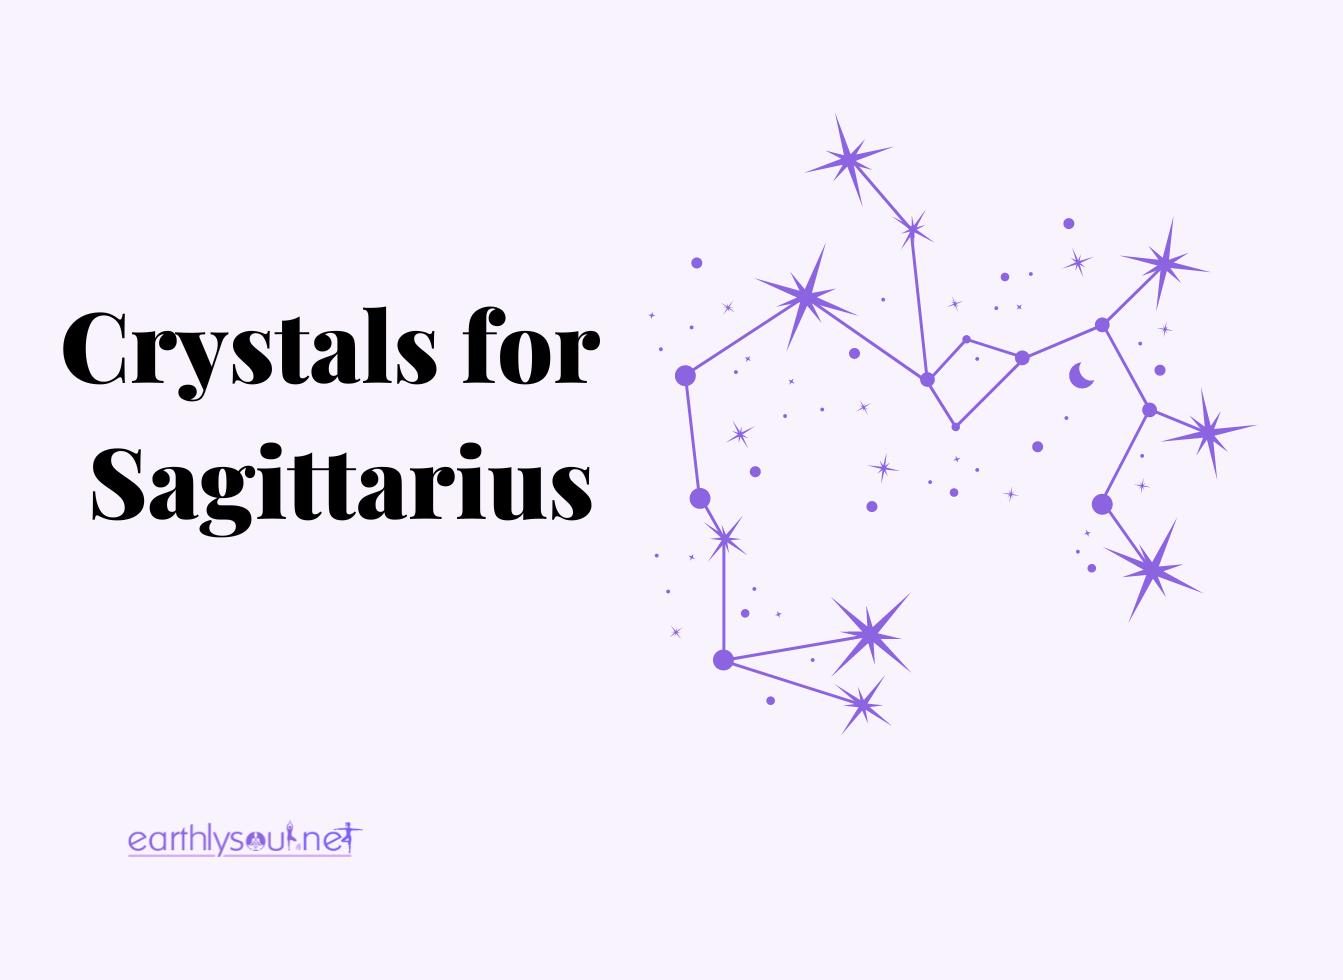 Crystals for sagittarius and zodiac sign featured image